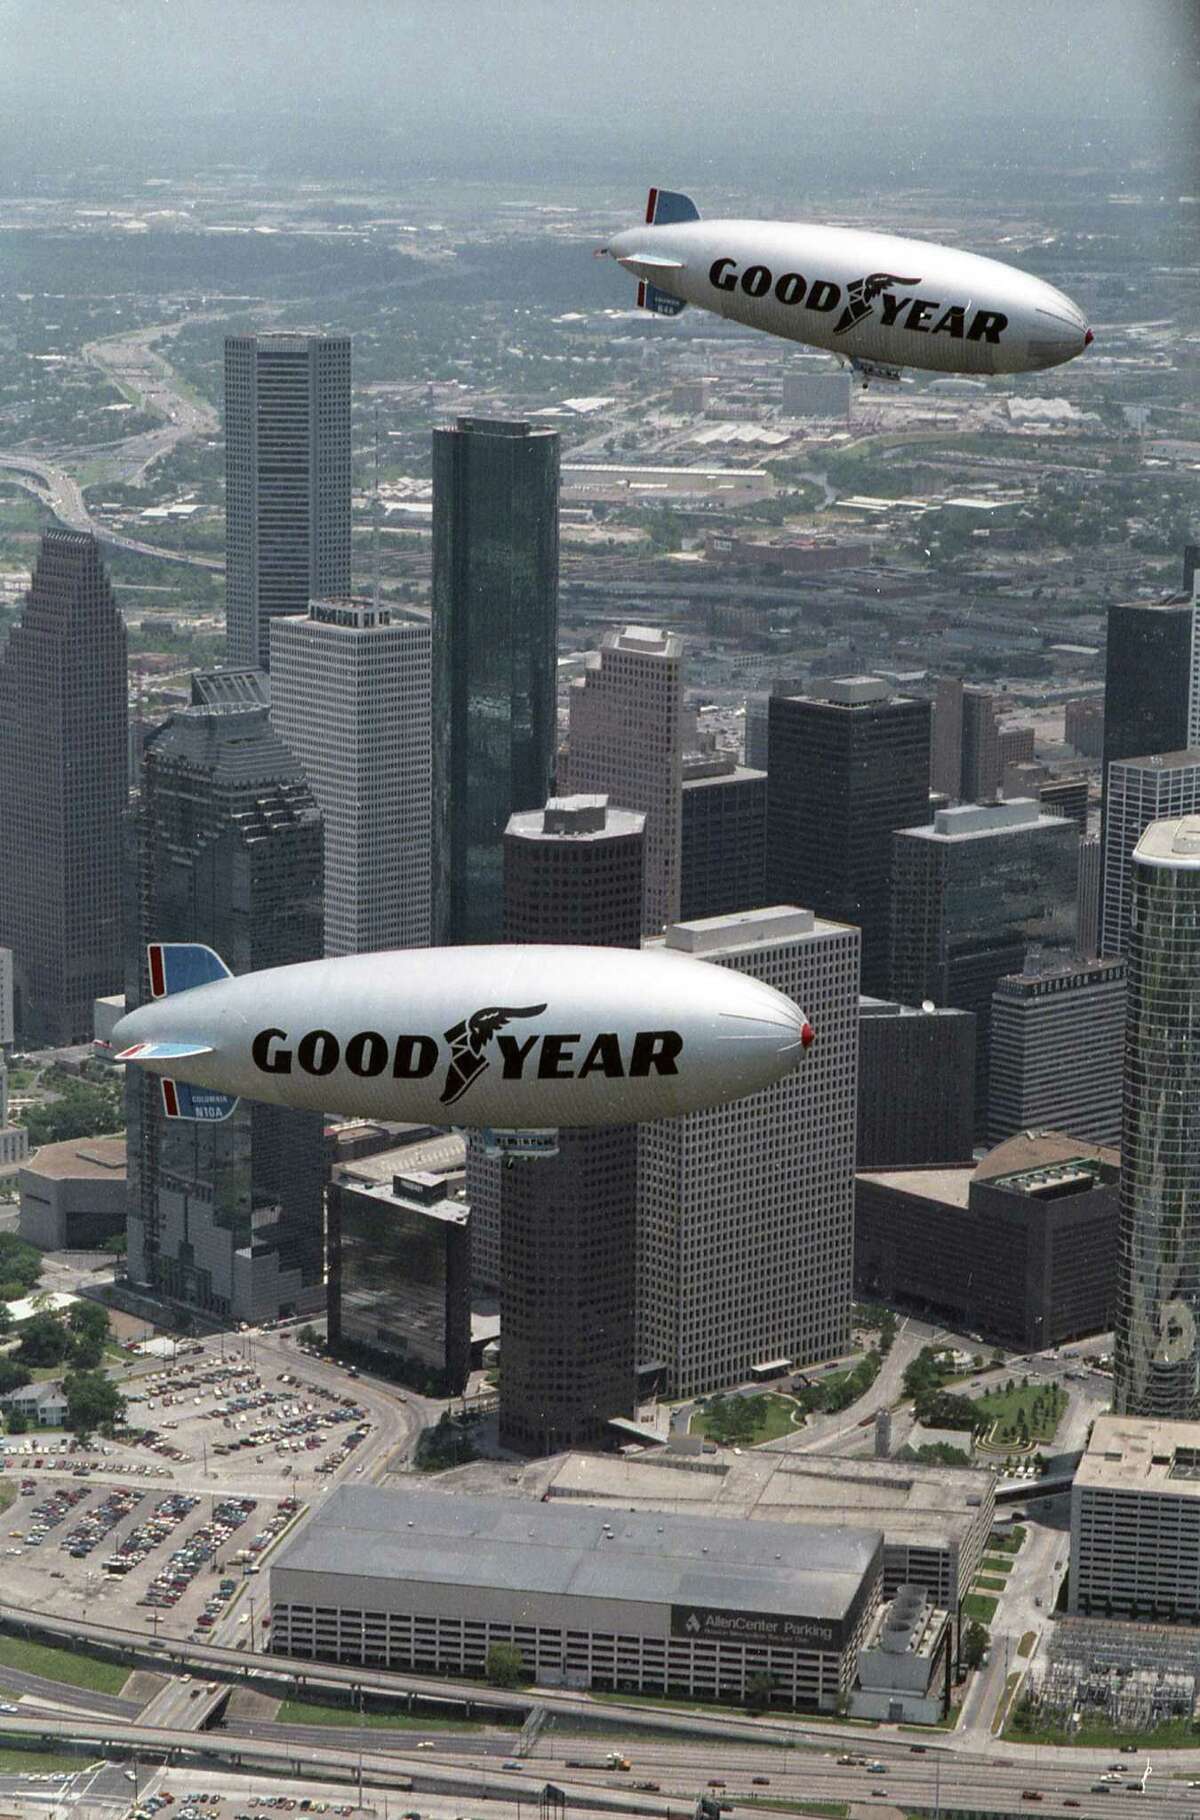 The Goodyear blimp Columbia takes a tour of Houston with its replacement, also named Columbia, July 1, 1986.